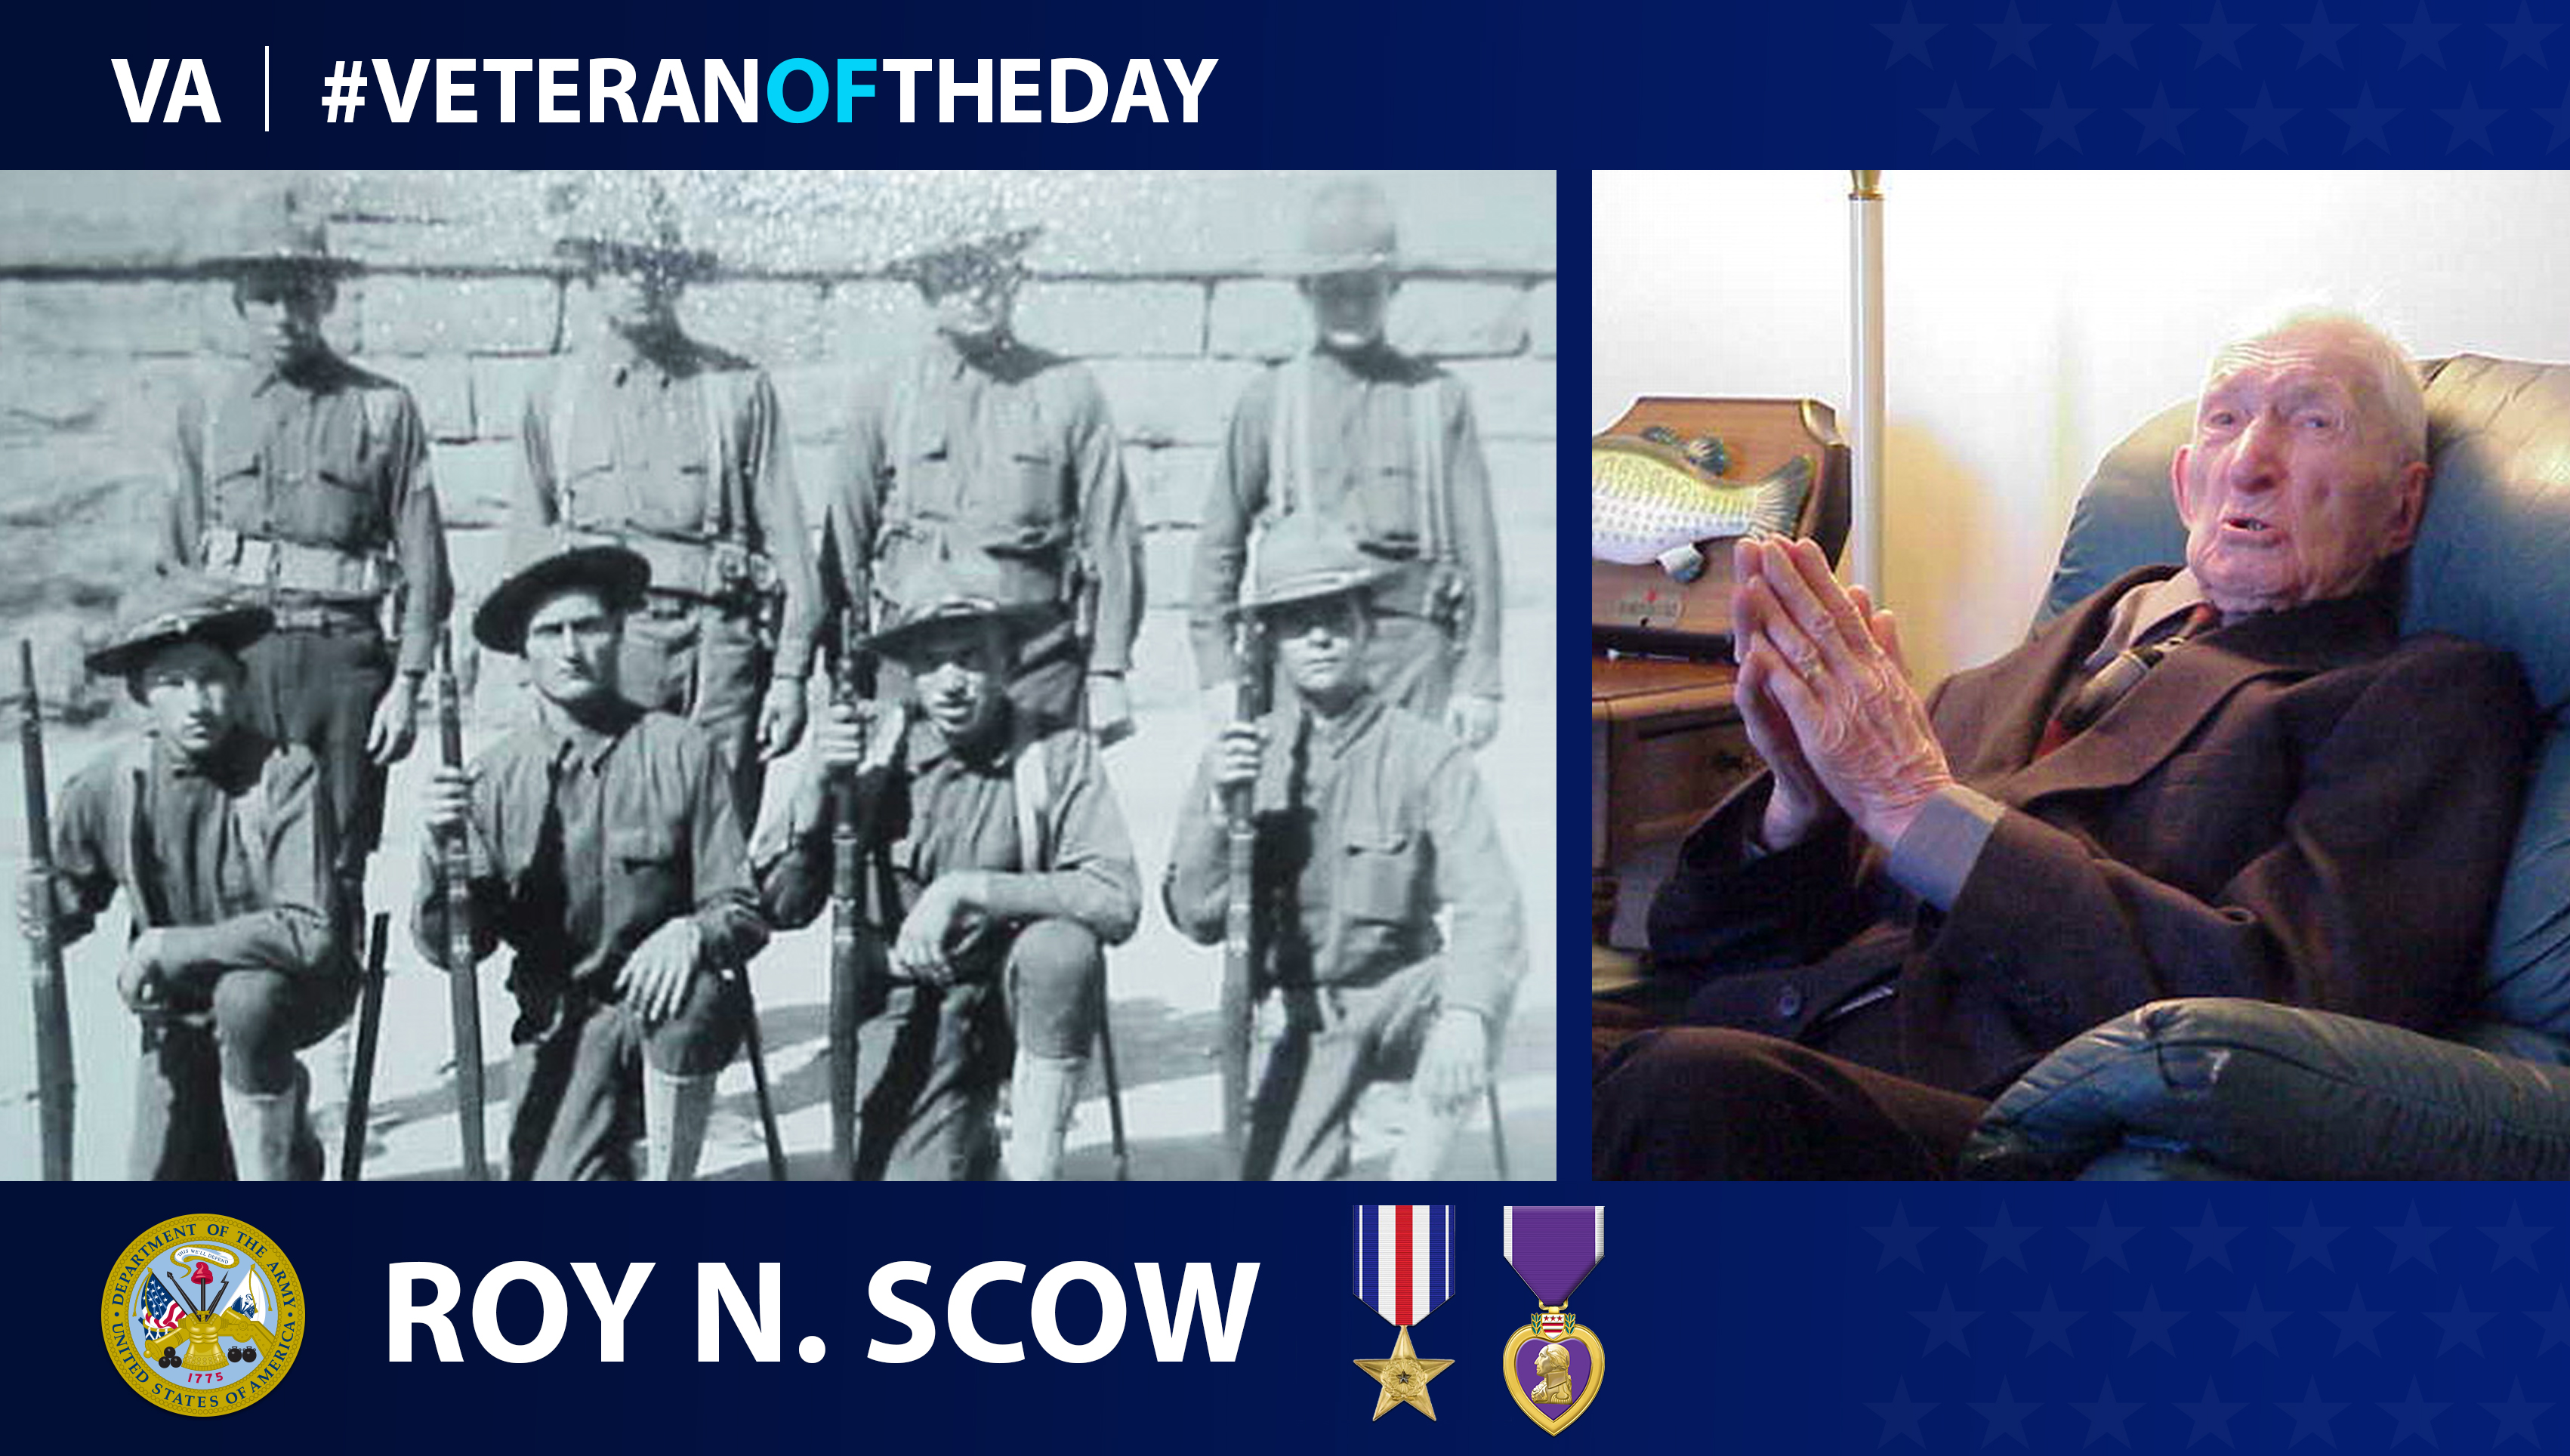 Army Veteran Roy N. Scow is today's Veteran of the Day.